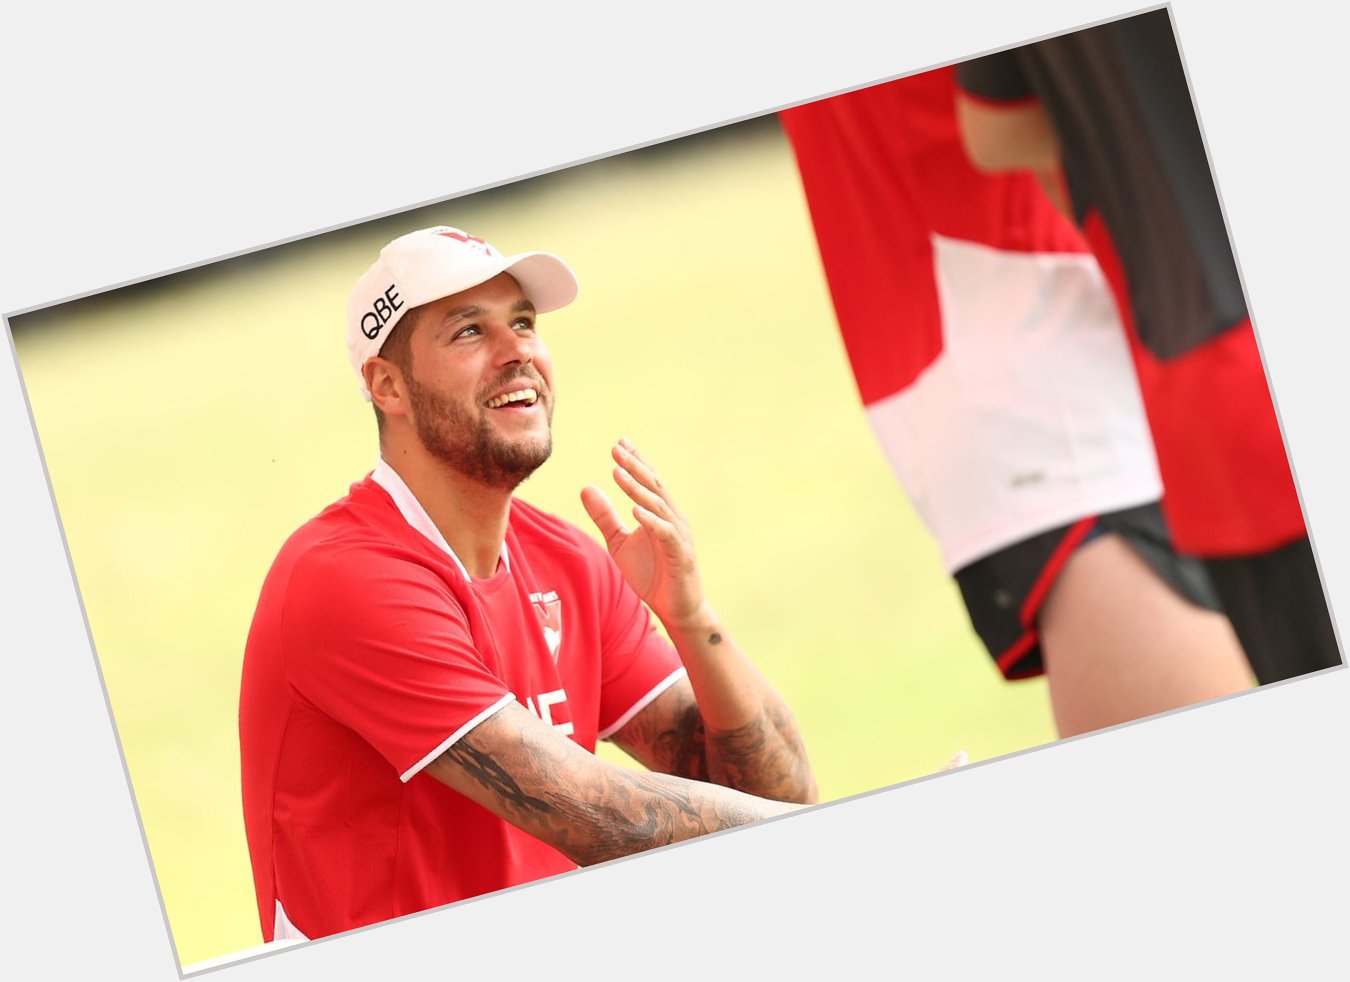 Lance Franklin\s right foot is one of the best in the AFL.

He\s left footed.  

Happy birthday, Buddy! 